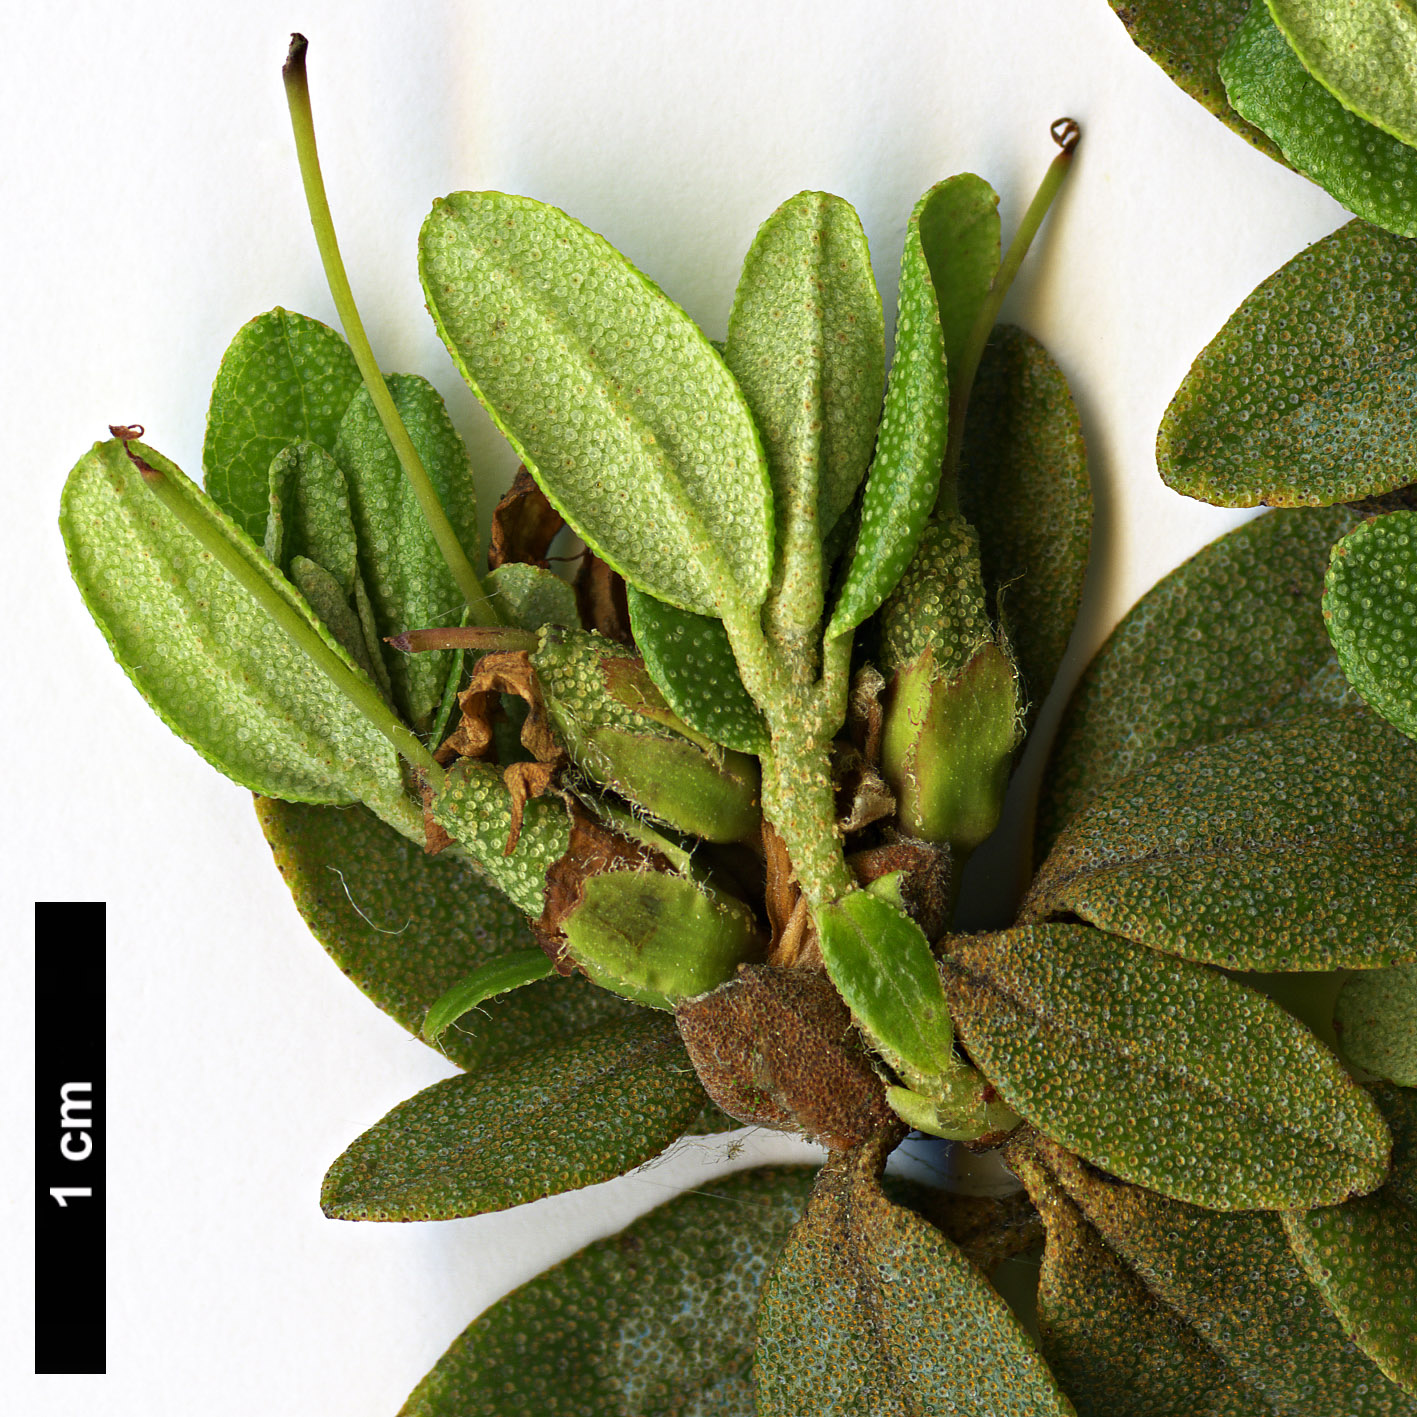 High resolution image: Family: Ericaceae - Genus: Rhododendron - Taxon: lapponicum